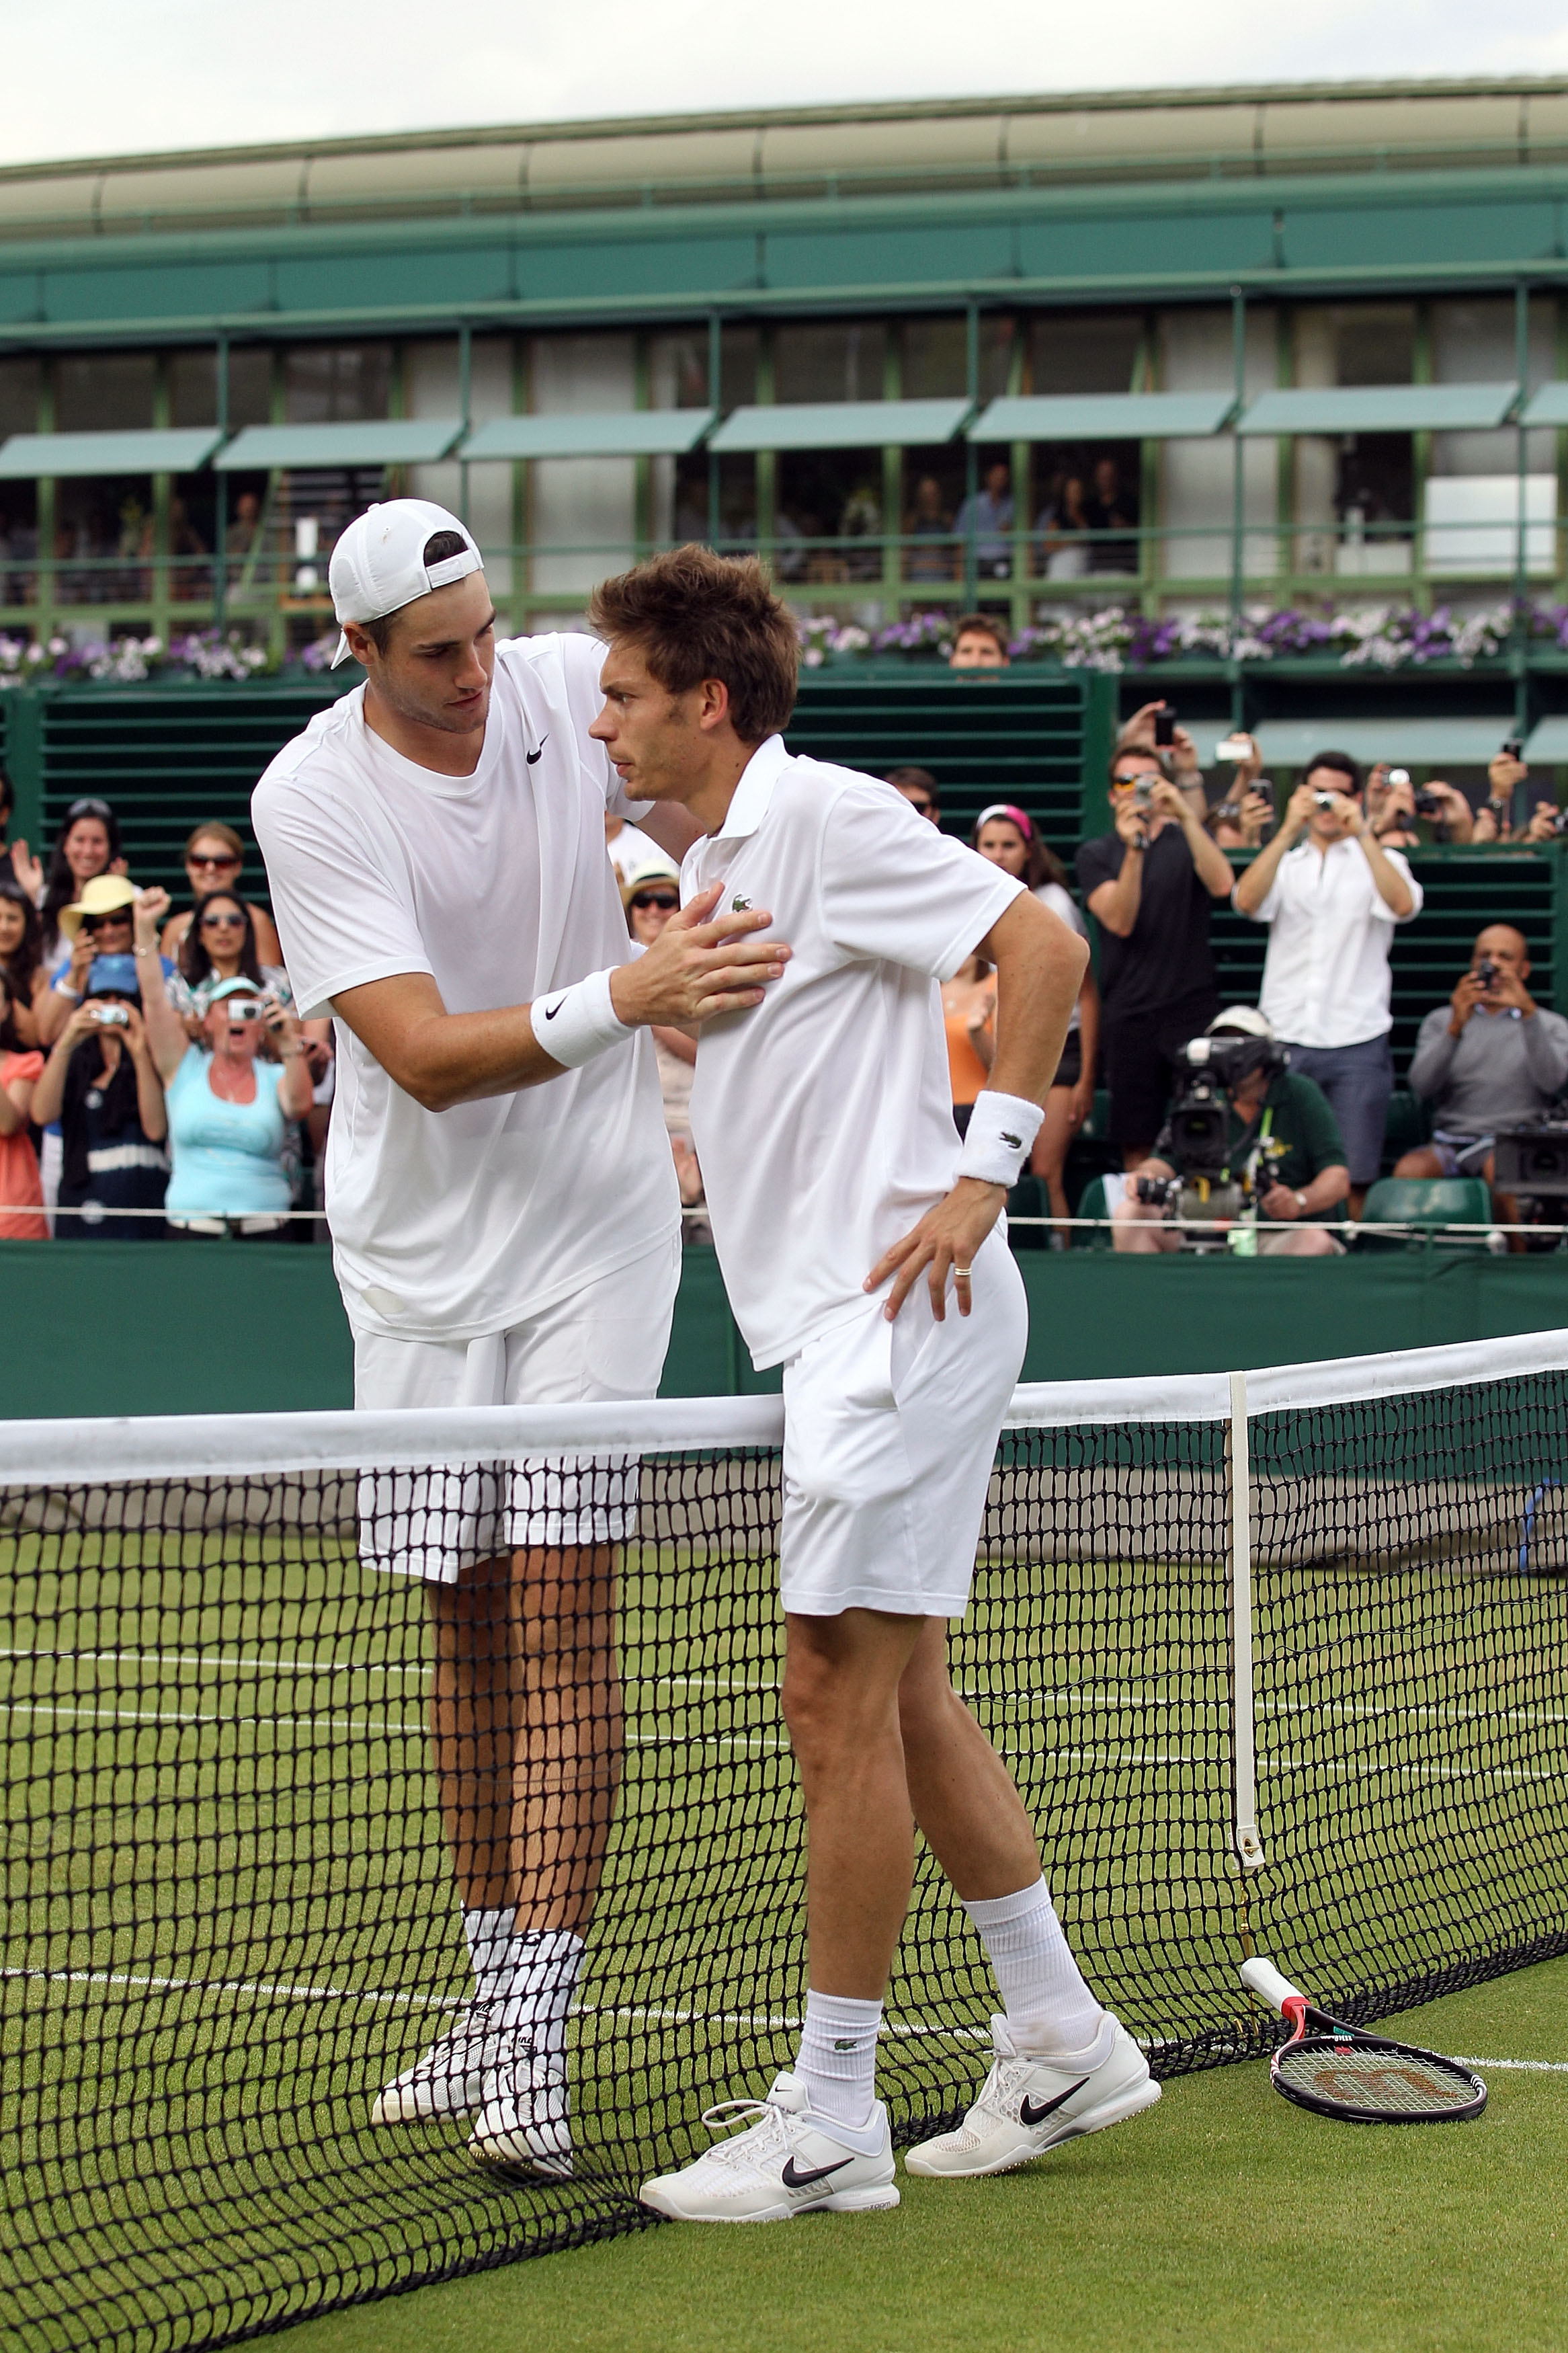 LONDON, ENGLAND - JUNE 24:  Nicolas Mahut of France (R) after losing on the third day of his first round match against John Isner of USA on Day Four of the Wimbledon Lawn Tennis Championships at the All England Lawn Tennis and Croquet Club on June 24, 201